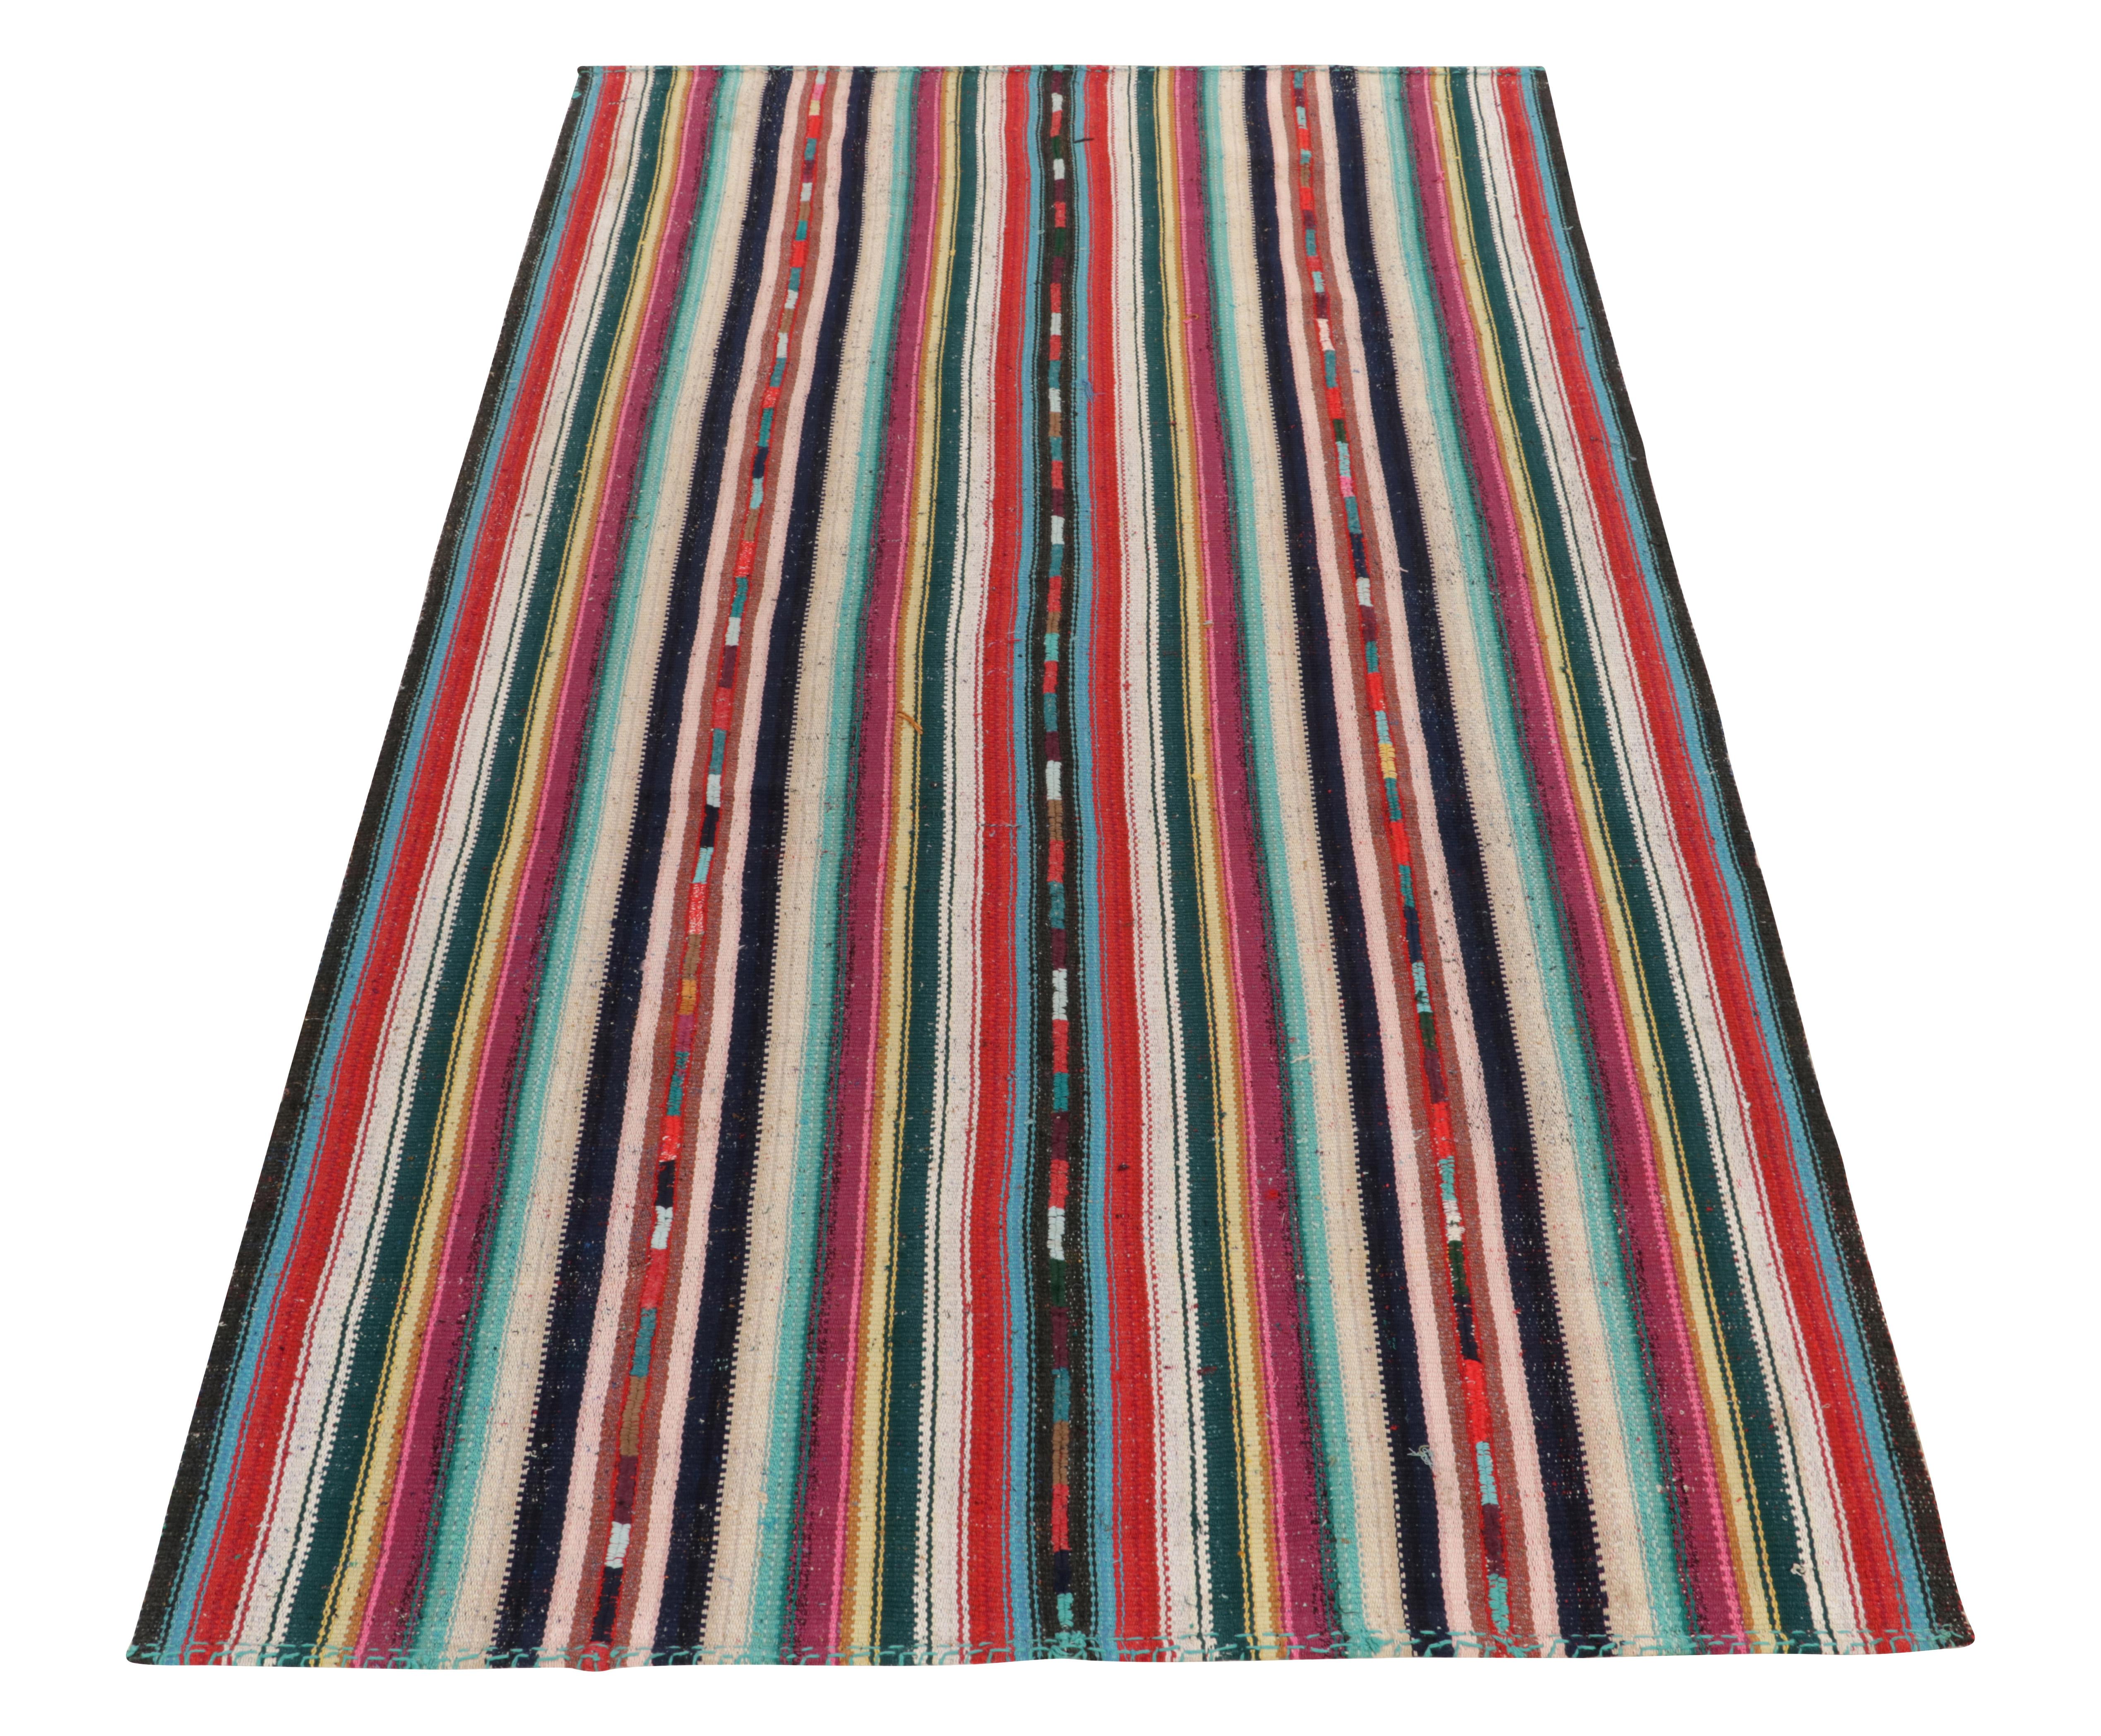 Hailing from Turkey circa 1950-1960, a rare type of vintage chaput kilim rug style from a special new curation. Characterized by fine detailing with the colors within the polychromatic stripes, this piece with fabulous hues invites a departure from